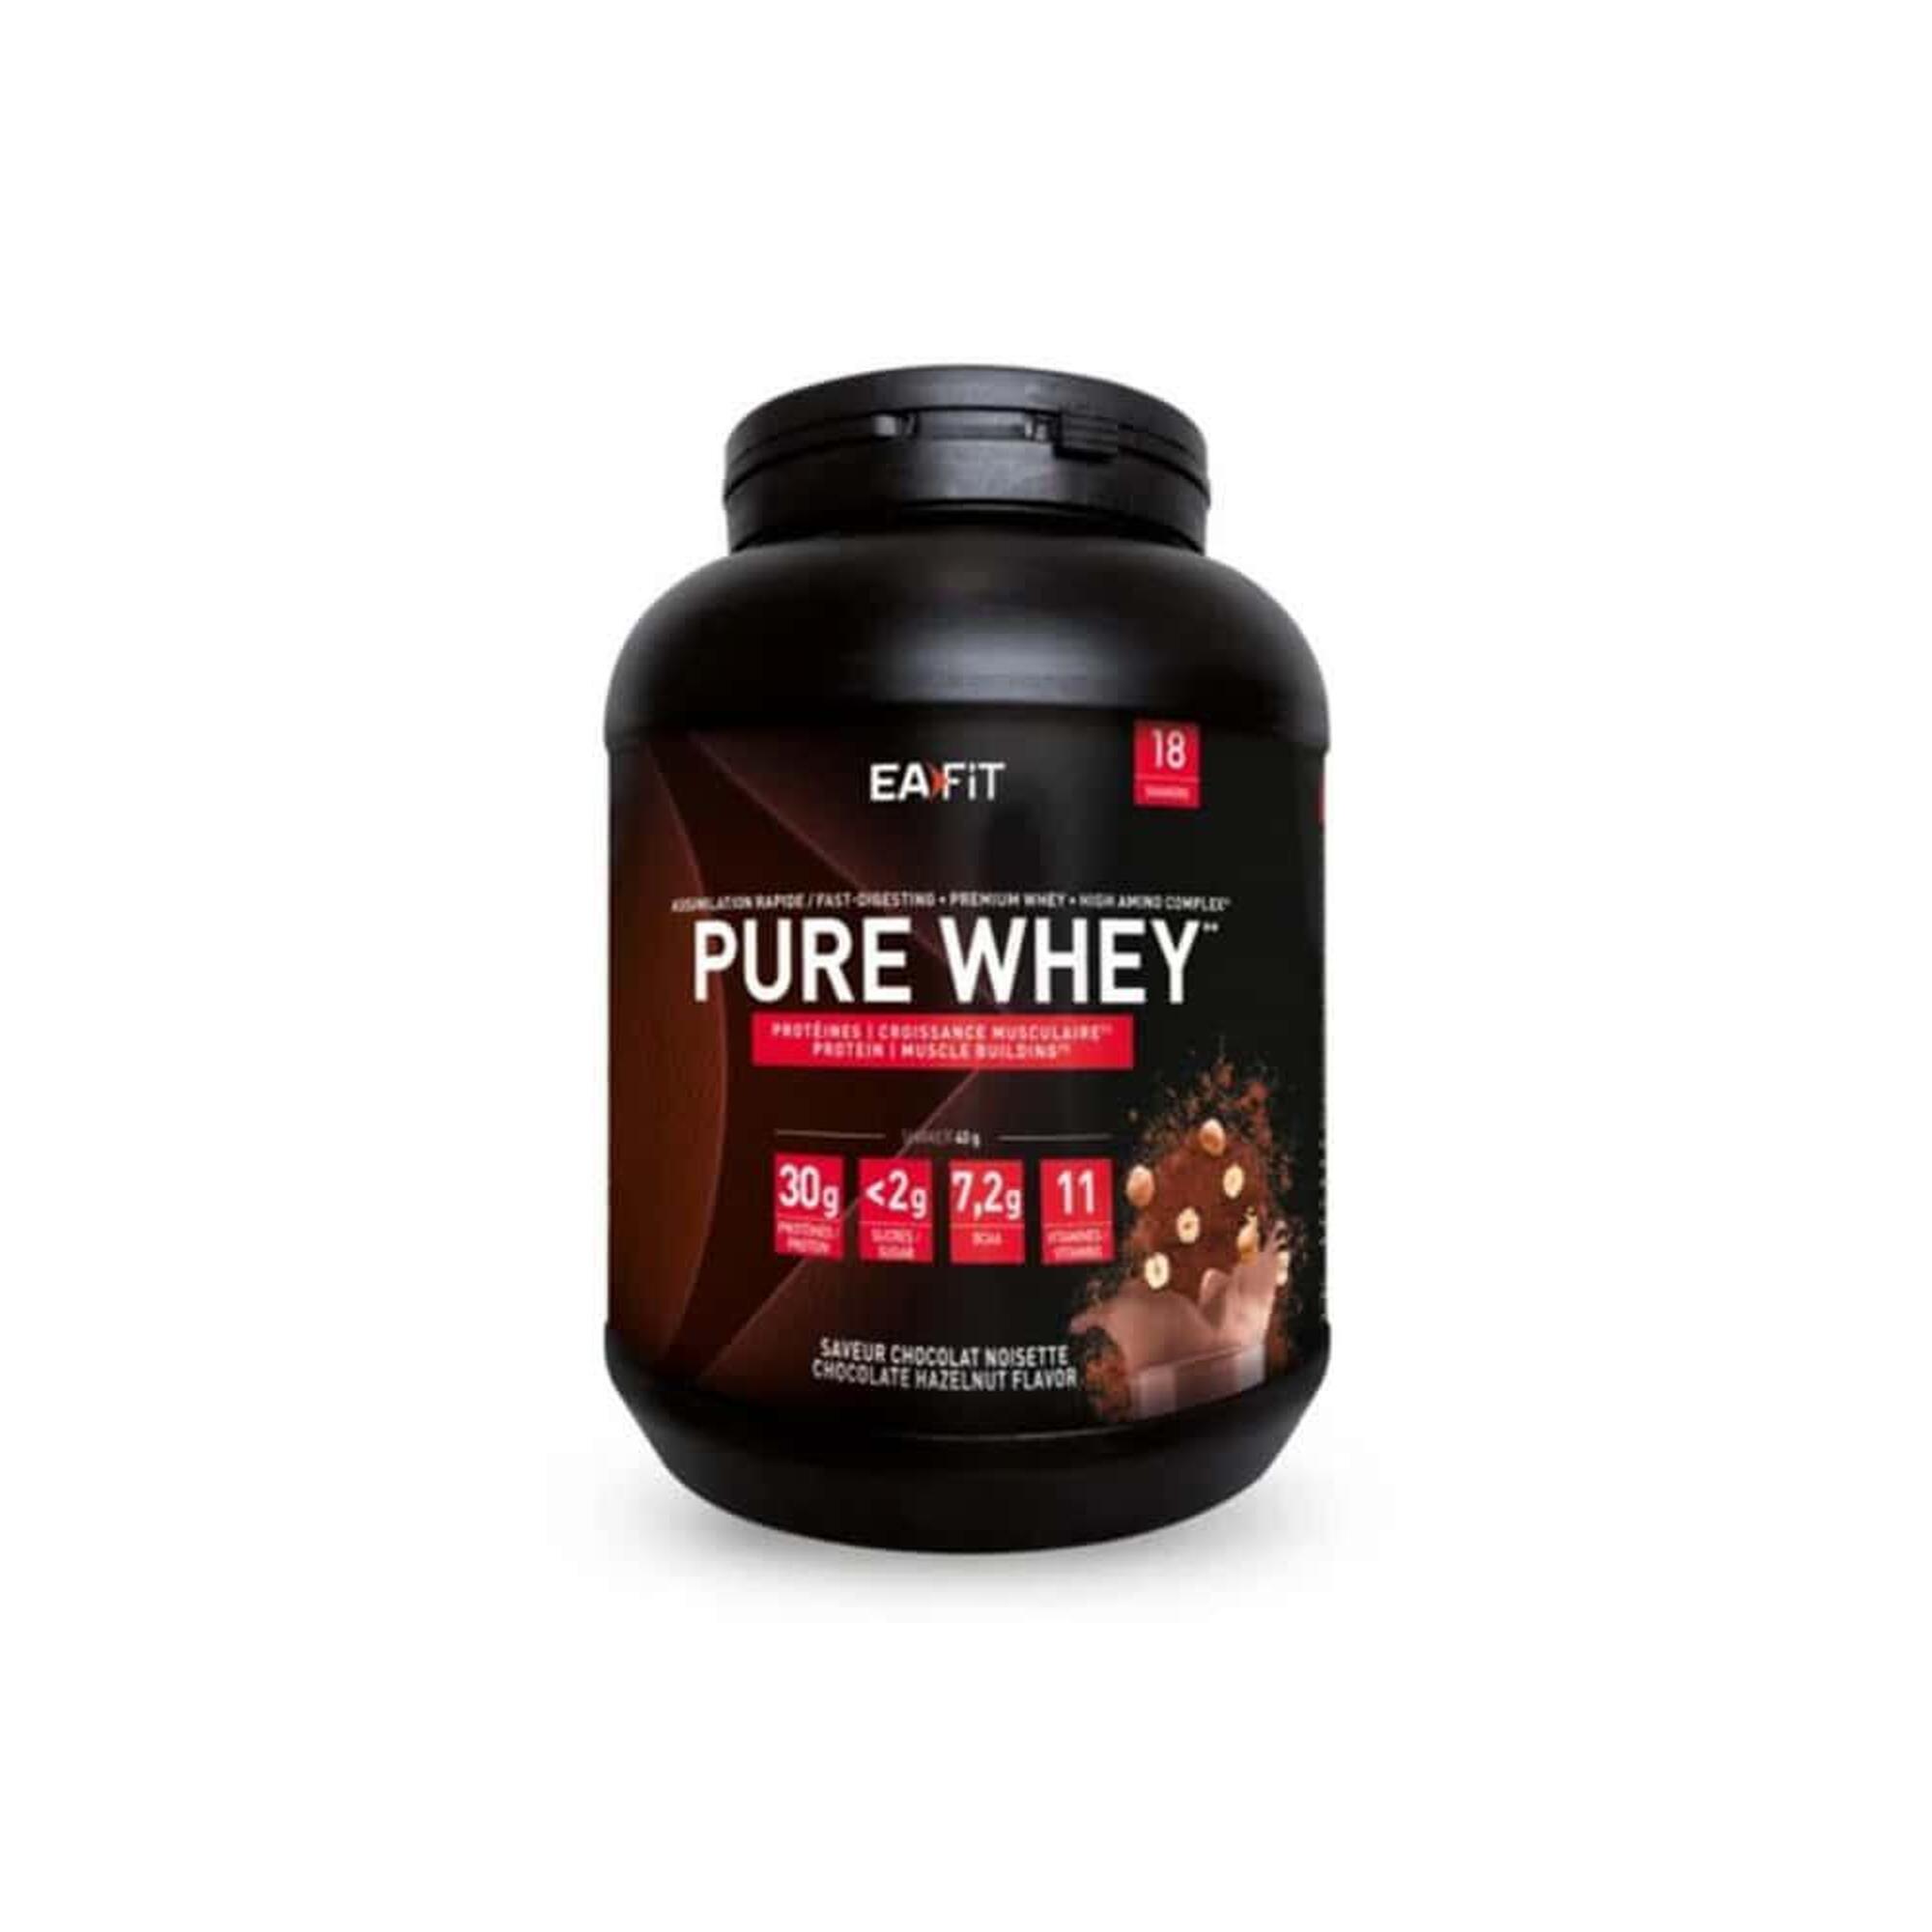 PURE WHEY VANILLE EAFIT